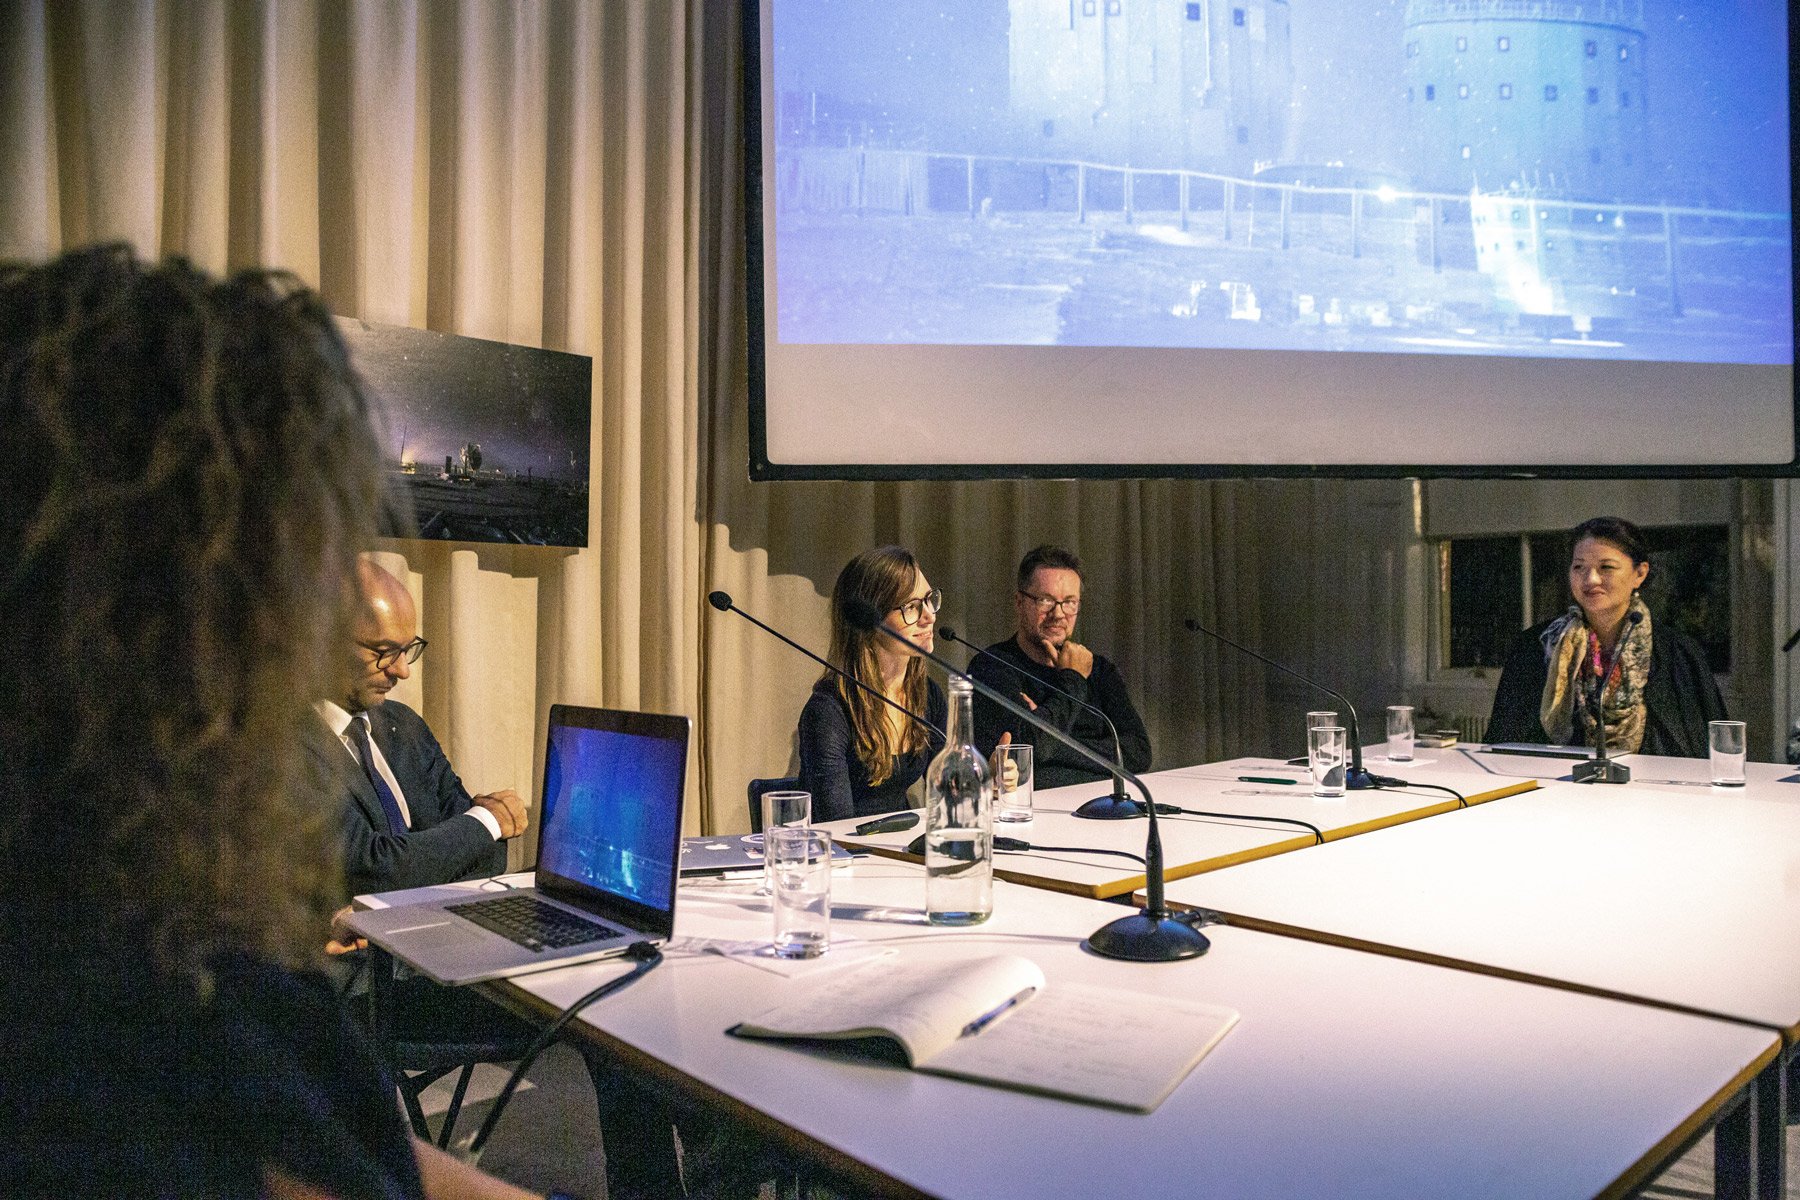 04_2019_UNLESS_SYMPOSIUM_ARCHITECTURE-IN-THE-EXREME_ROUND-TABLE.jpg